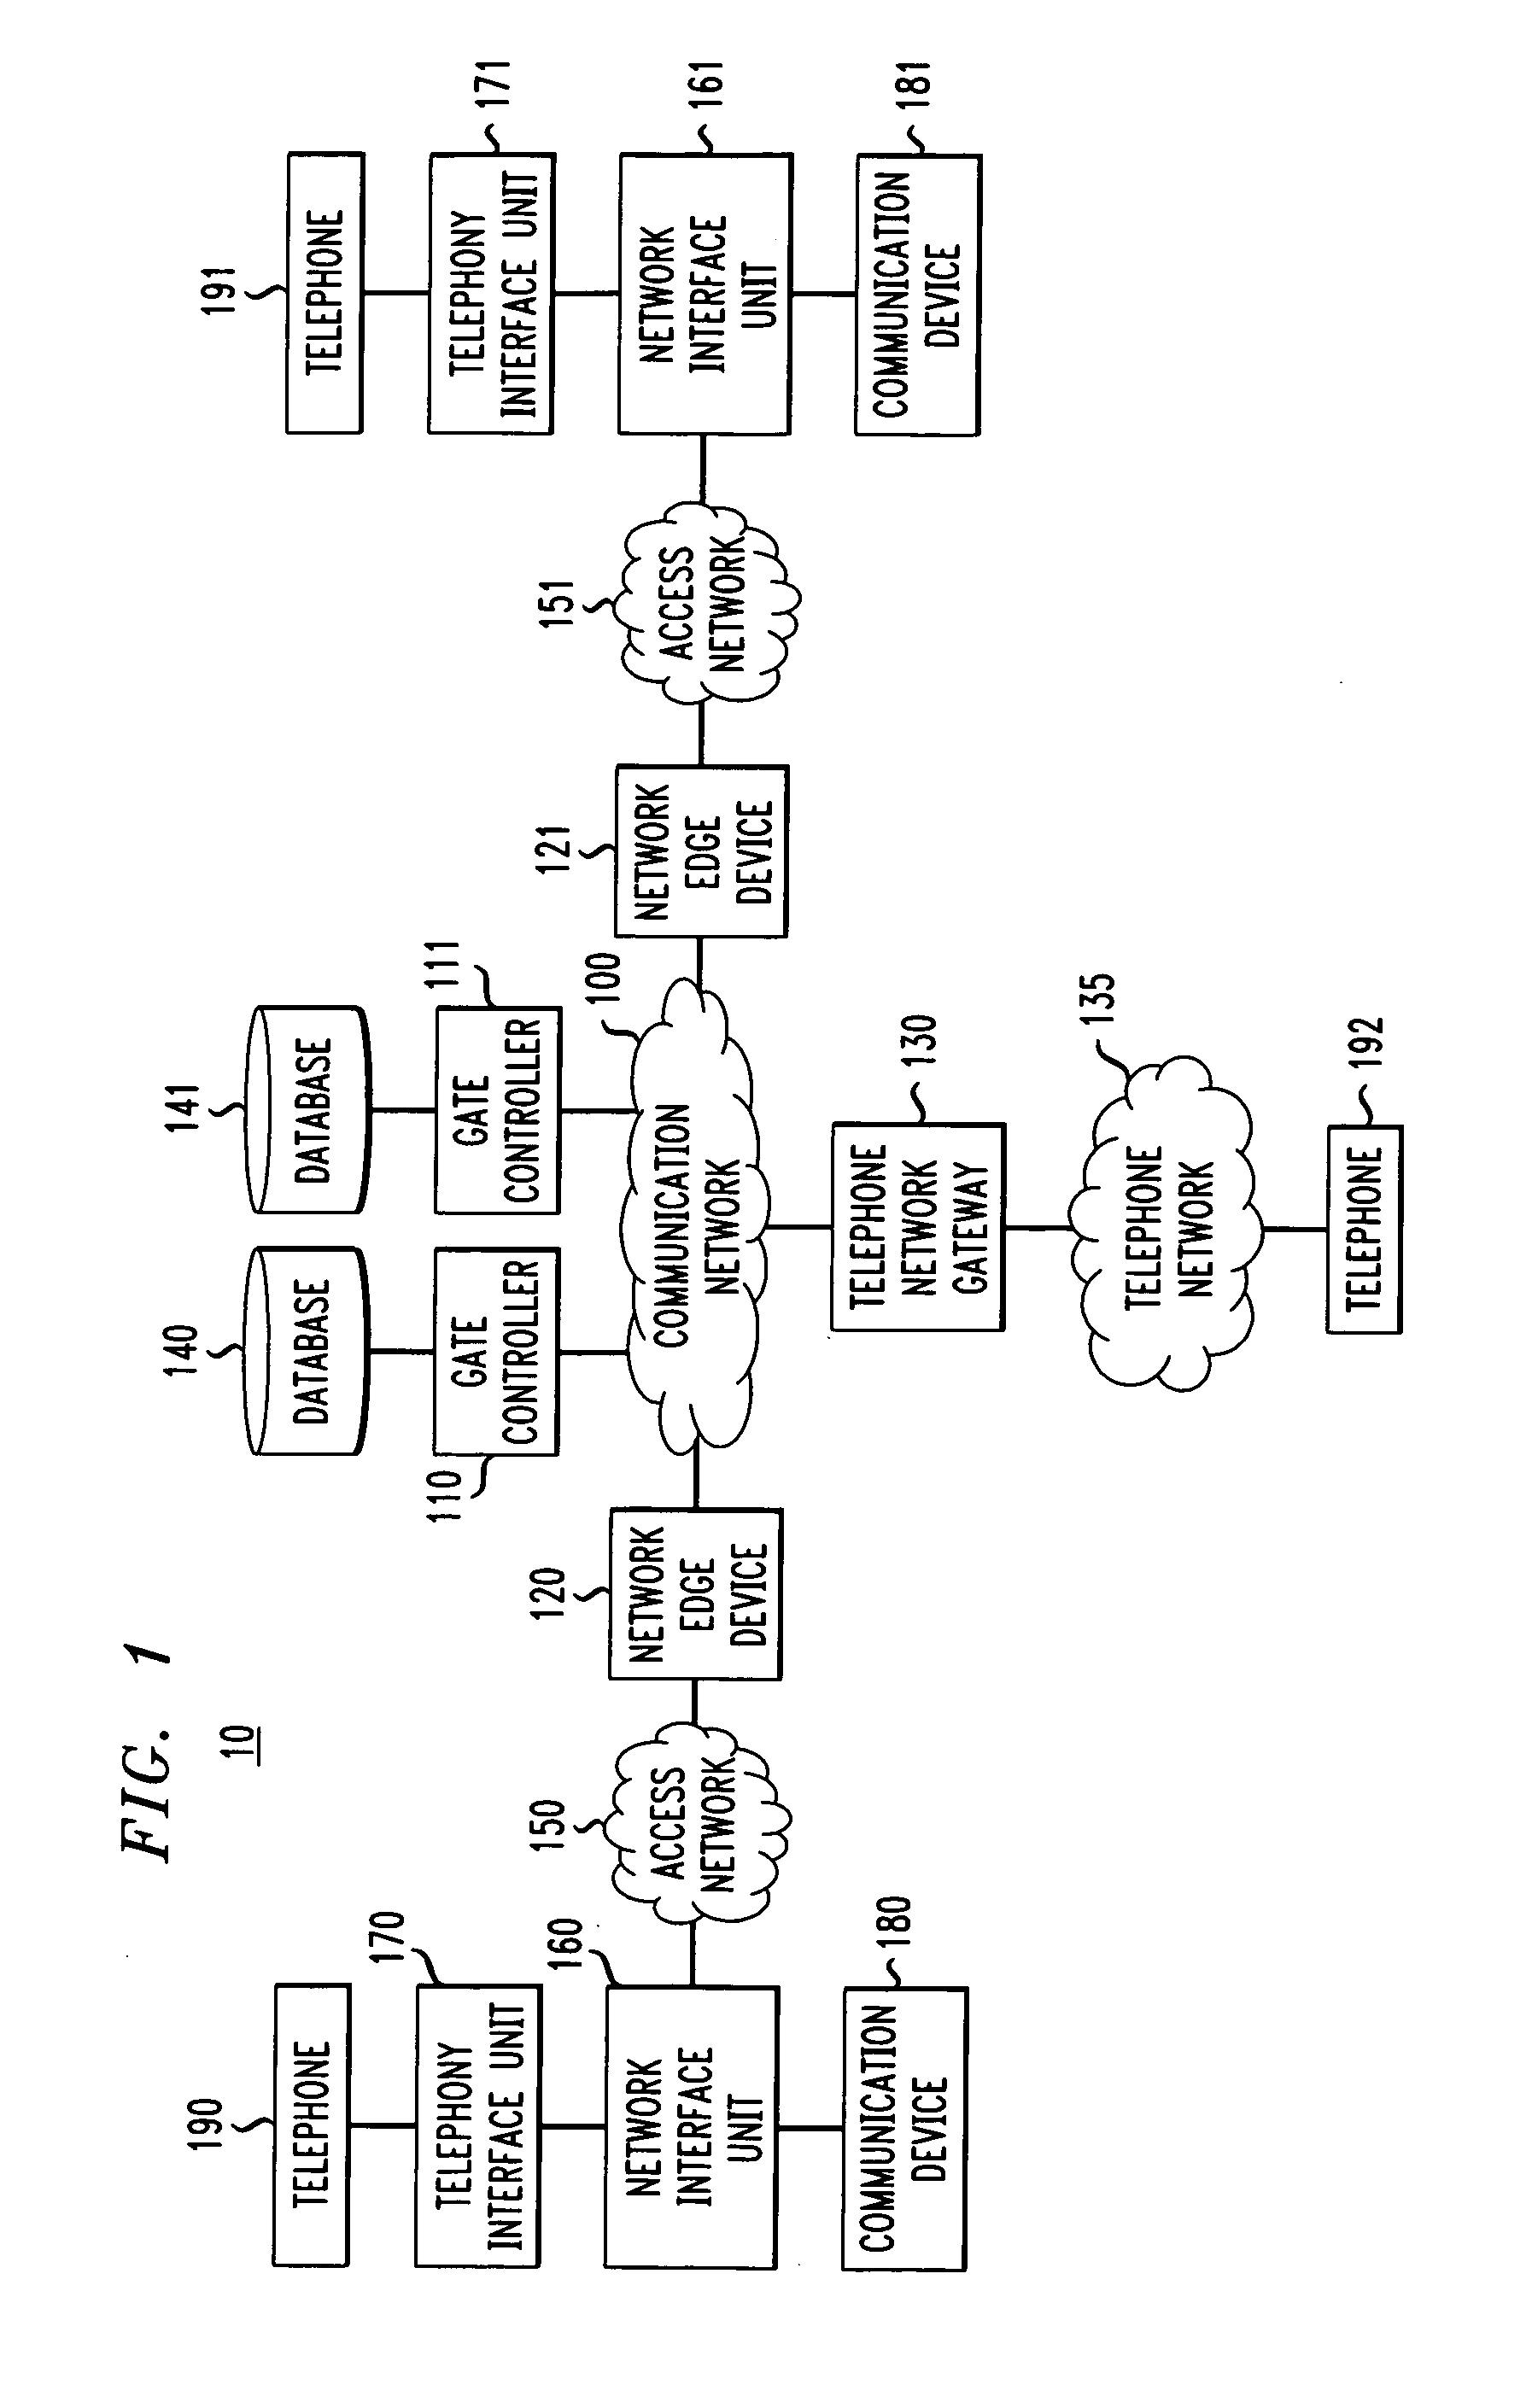 Method for performing lawfully-authorized electronic surveillance